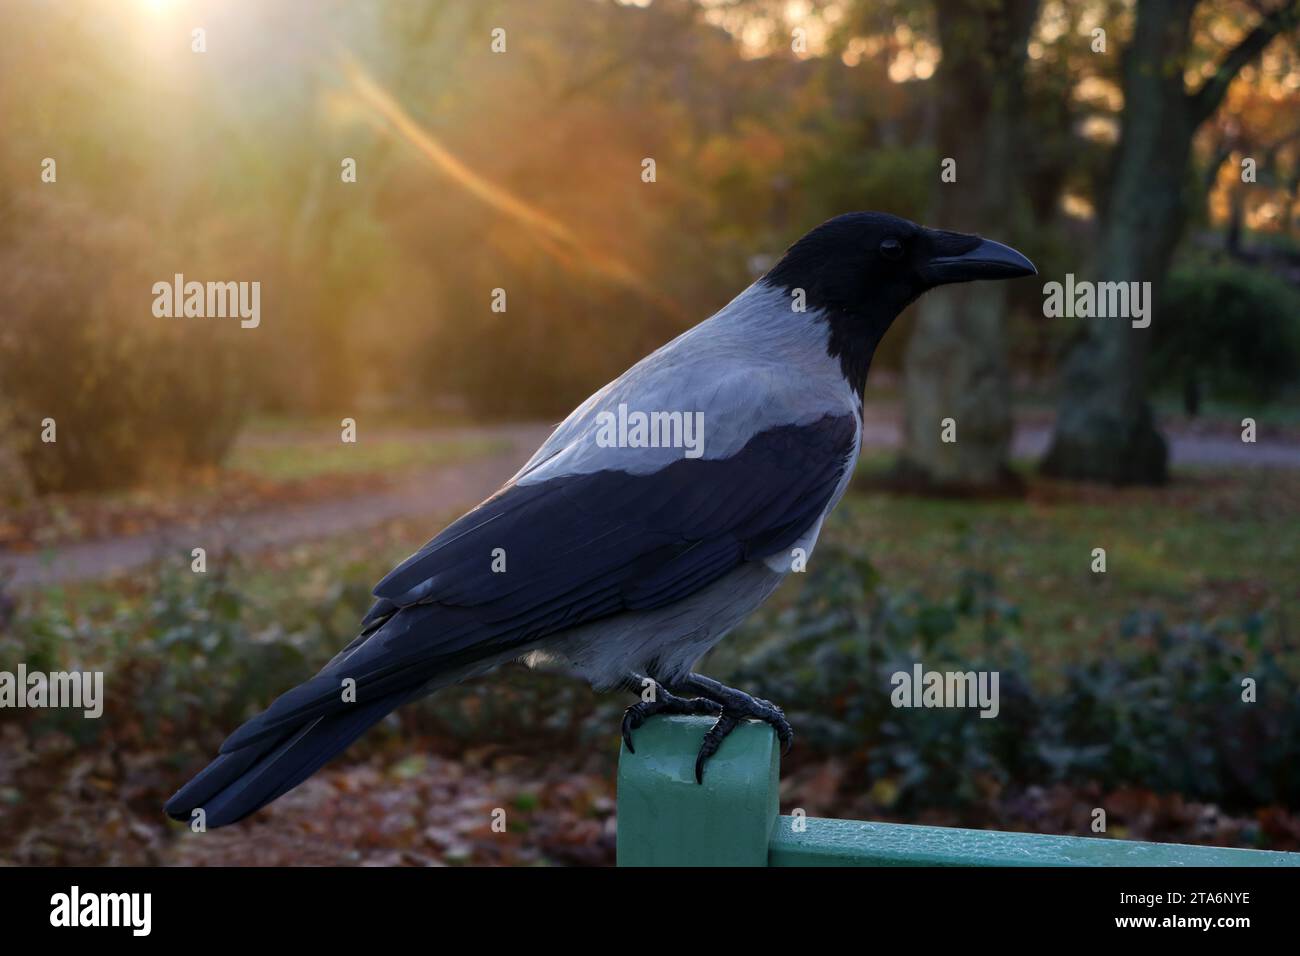 Young Hooded Crow, Corvus cornix, perched on the back of a bench in park in early morning sunlight. Stock Photo